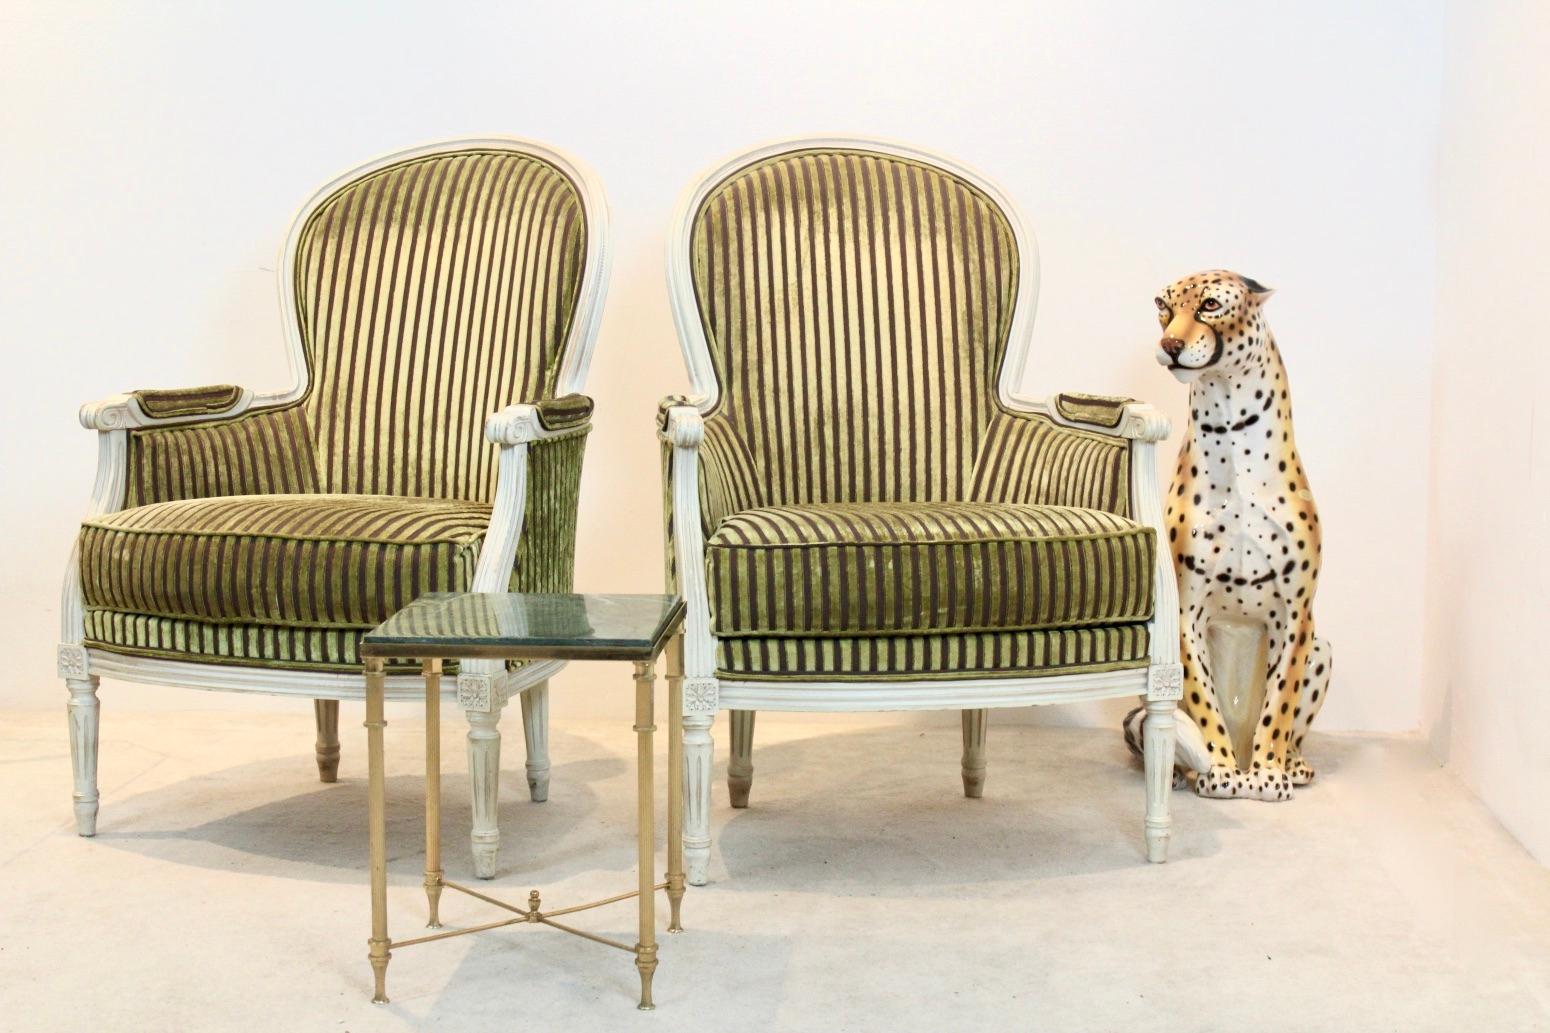 Neoclassical Revival Pair of Louis XVI Style Bergère Chairs by Rosello Paris, France